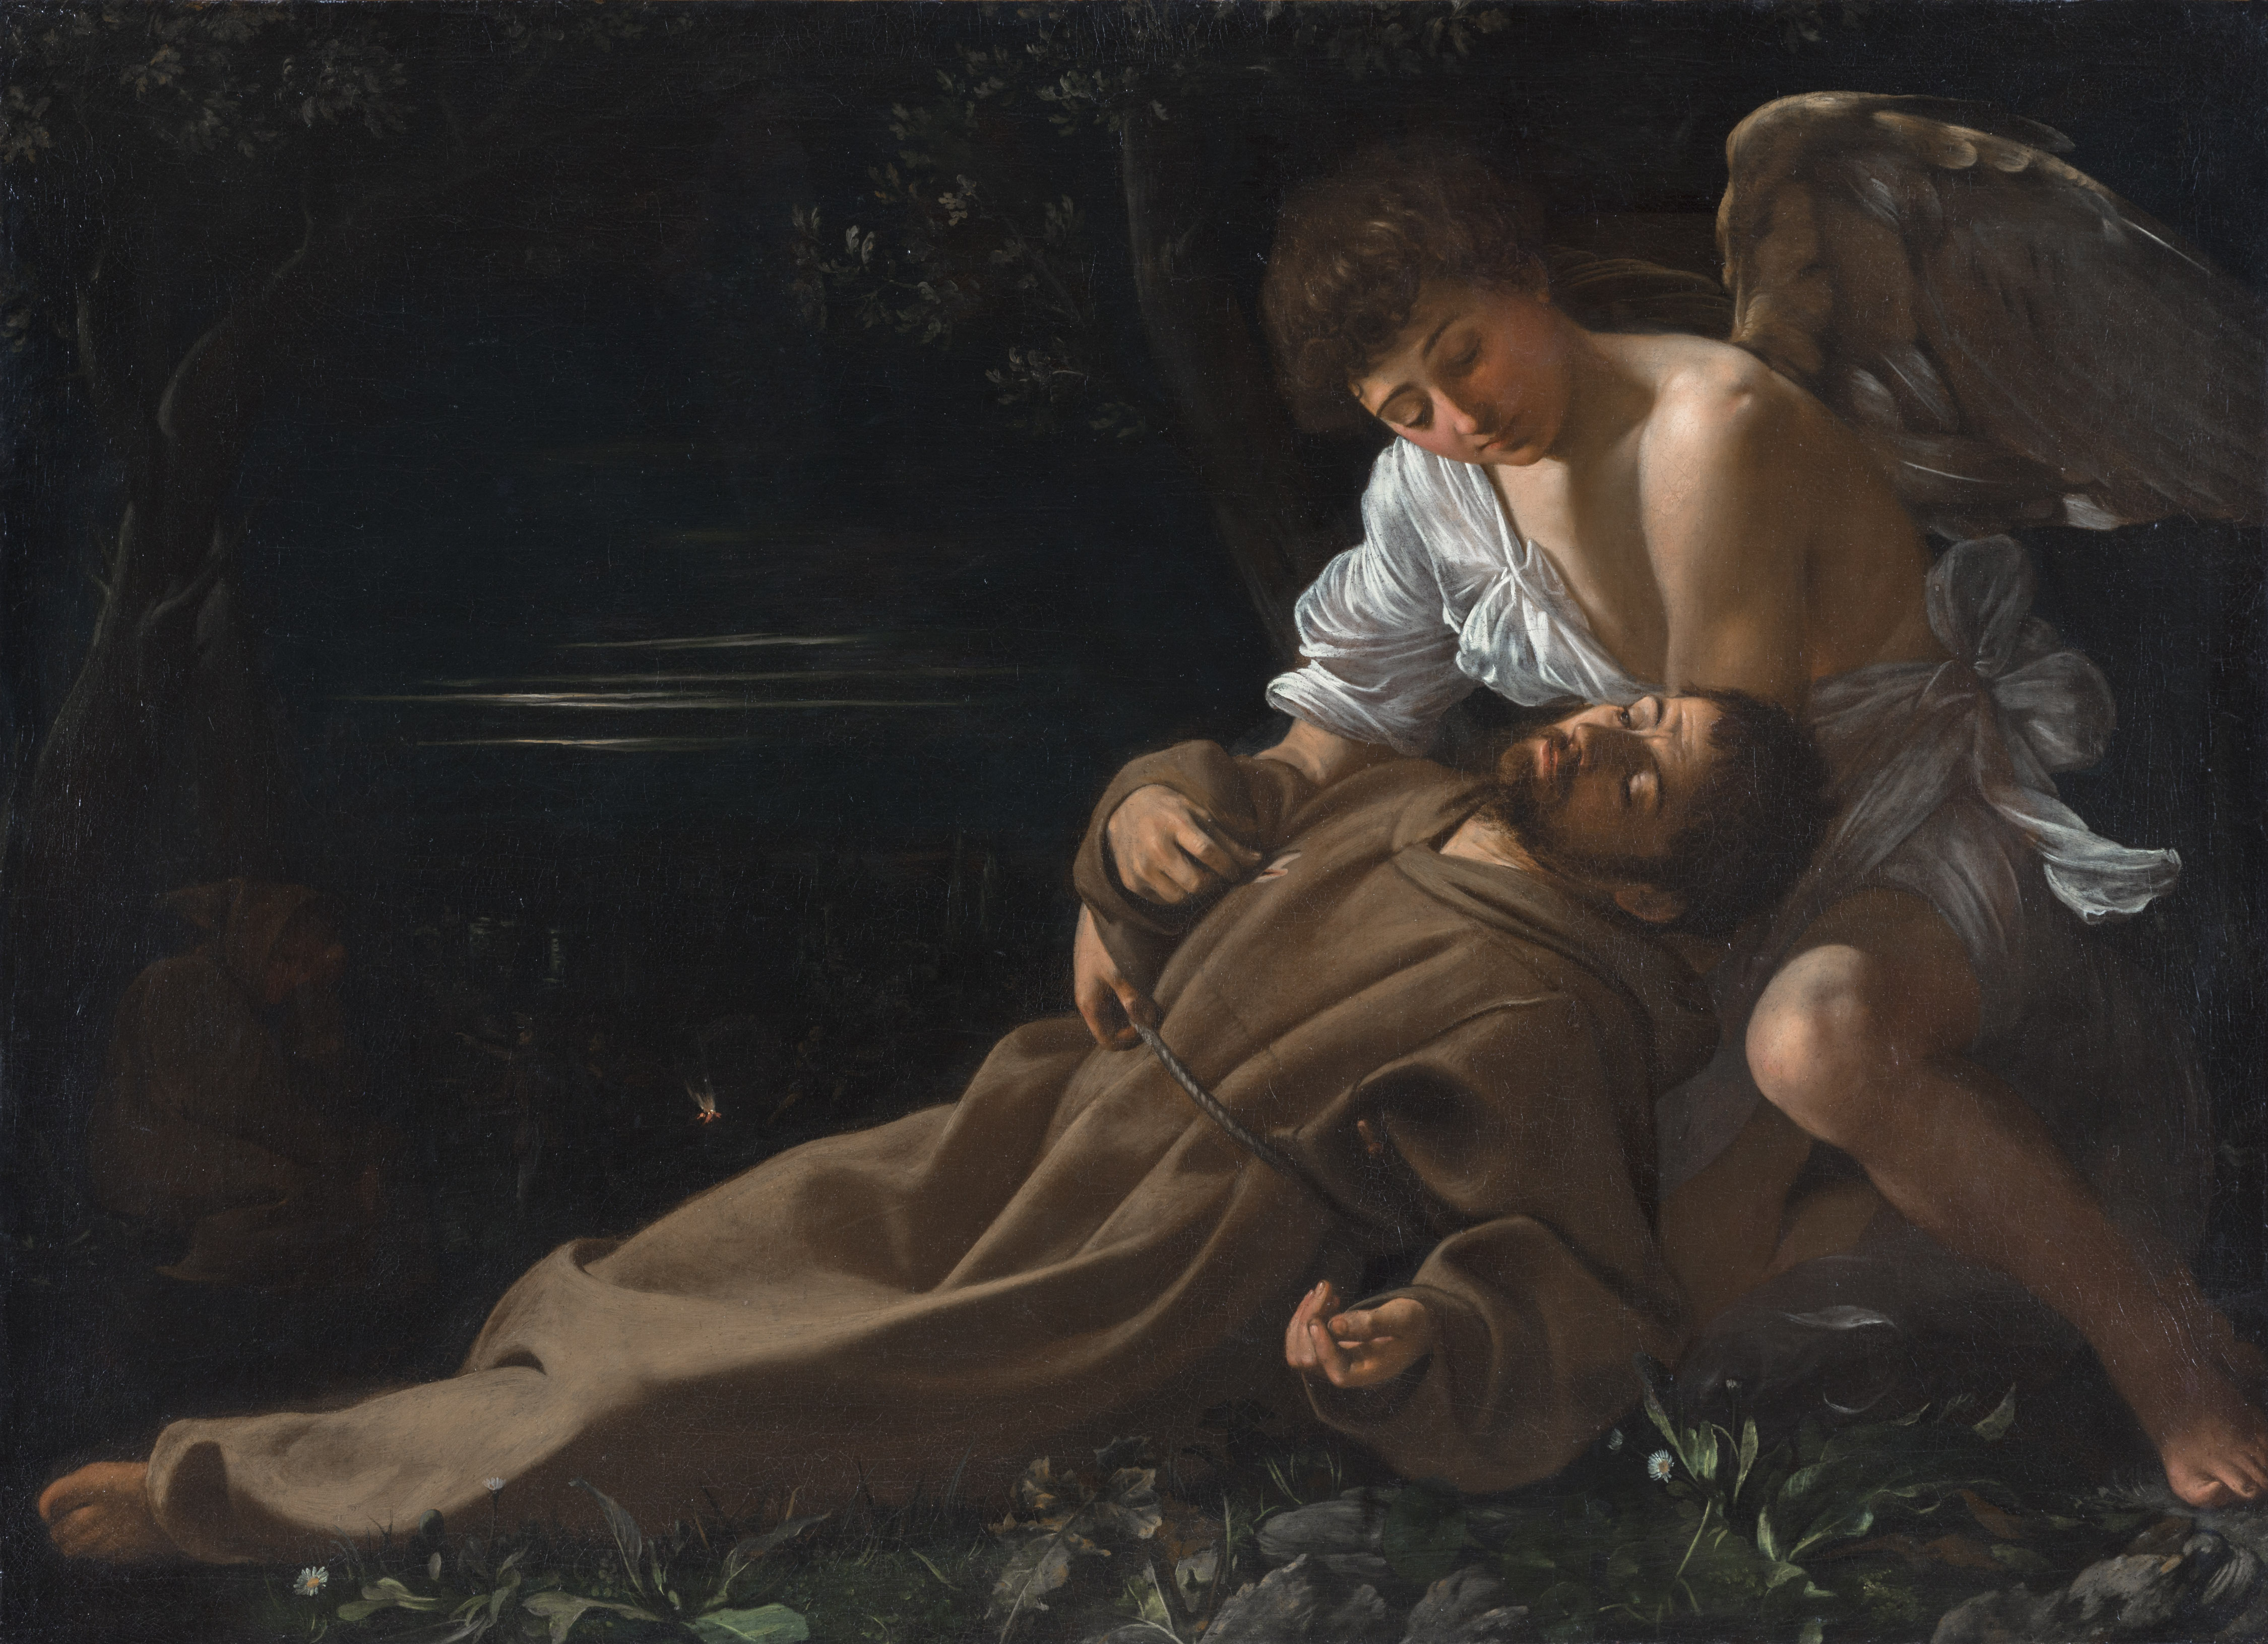 Saint Francis of Assisi in Ecstasy by  Caravaggio - c. 1595-96 - 37 x 51 in. Wadsworth Atheneum Museum of Art